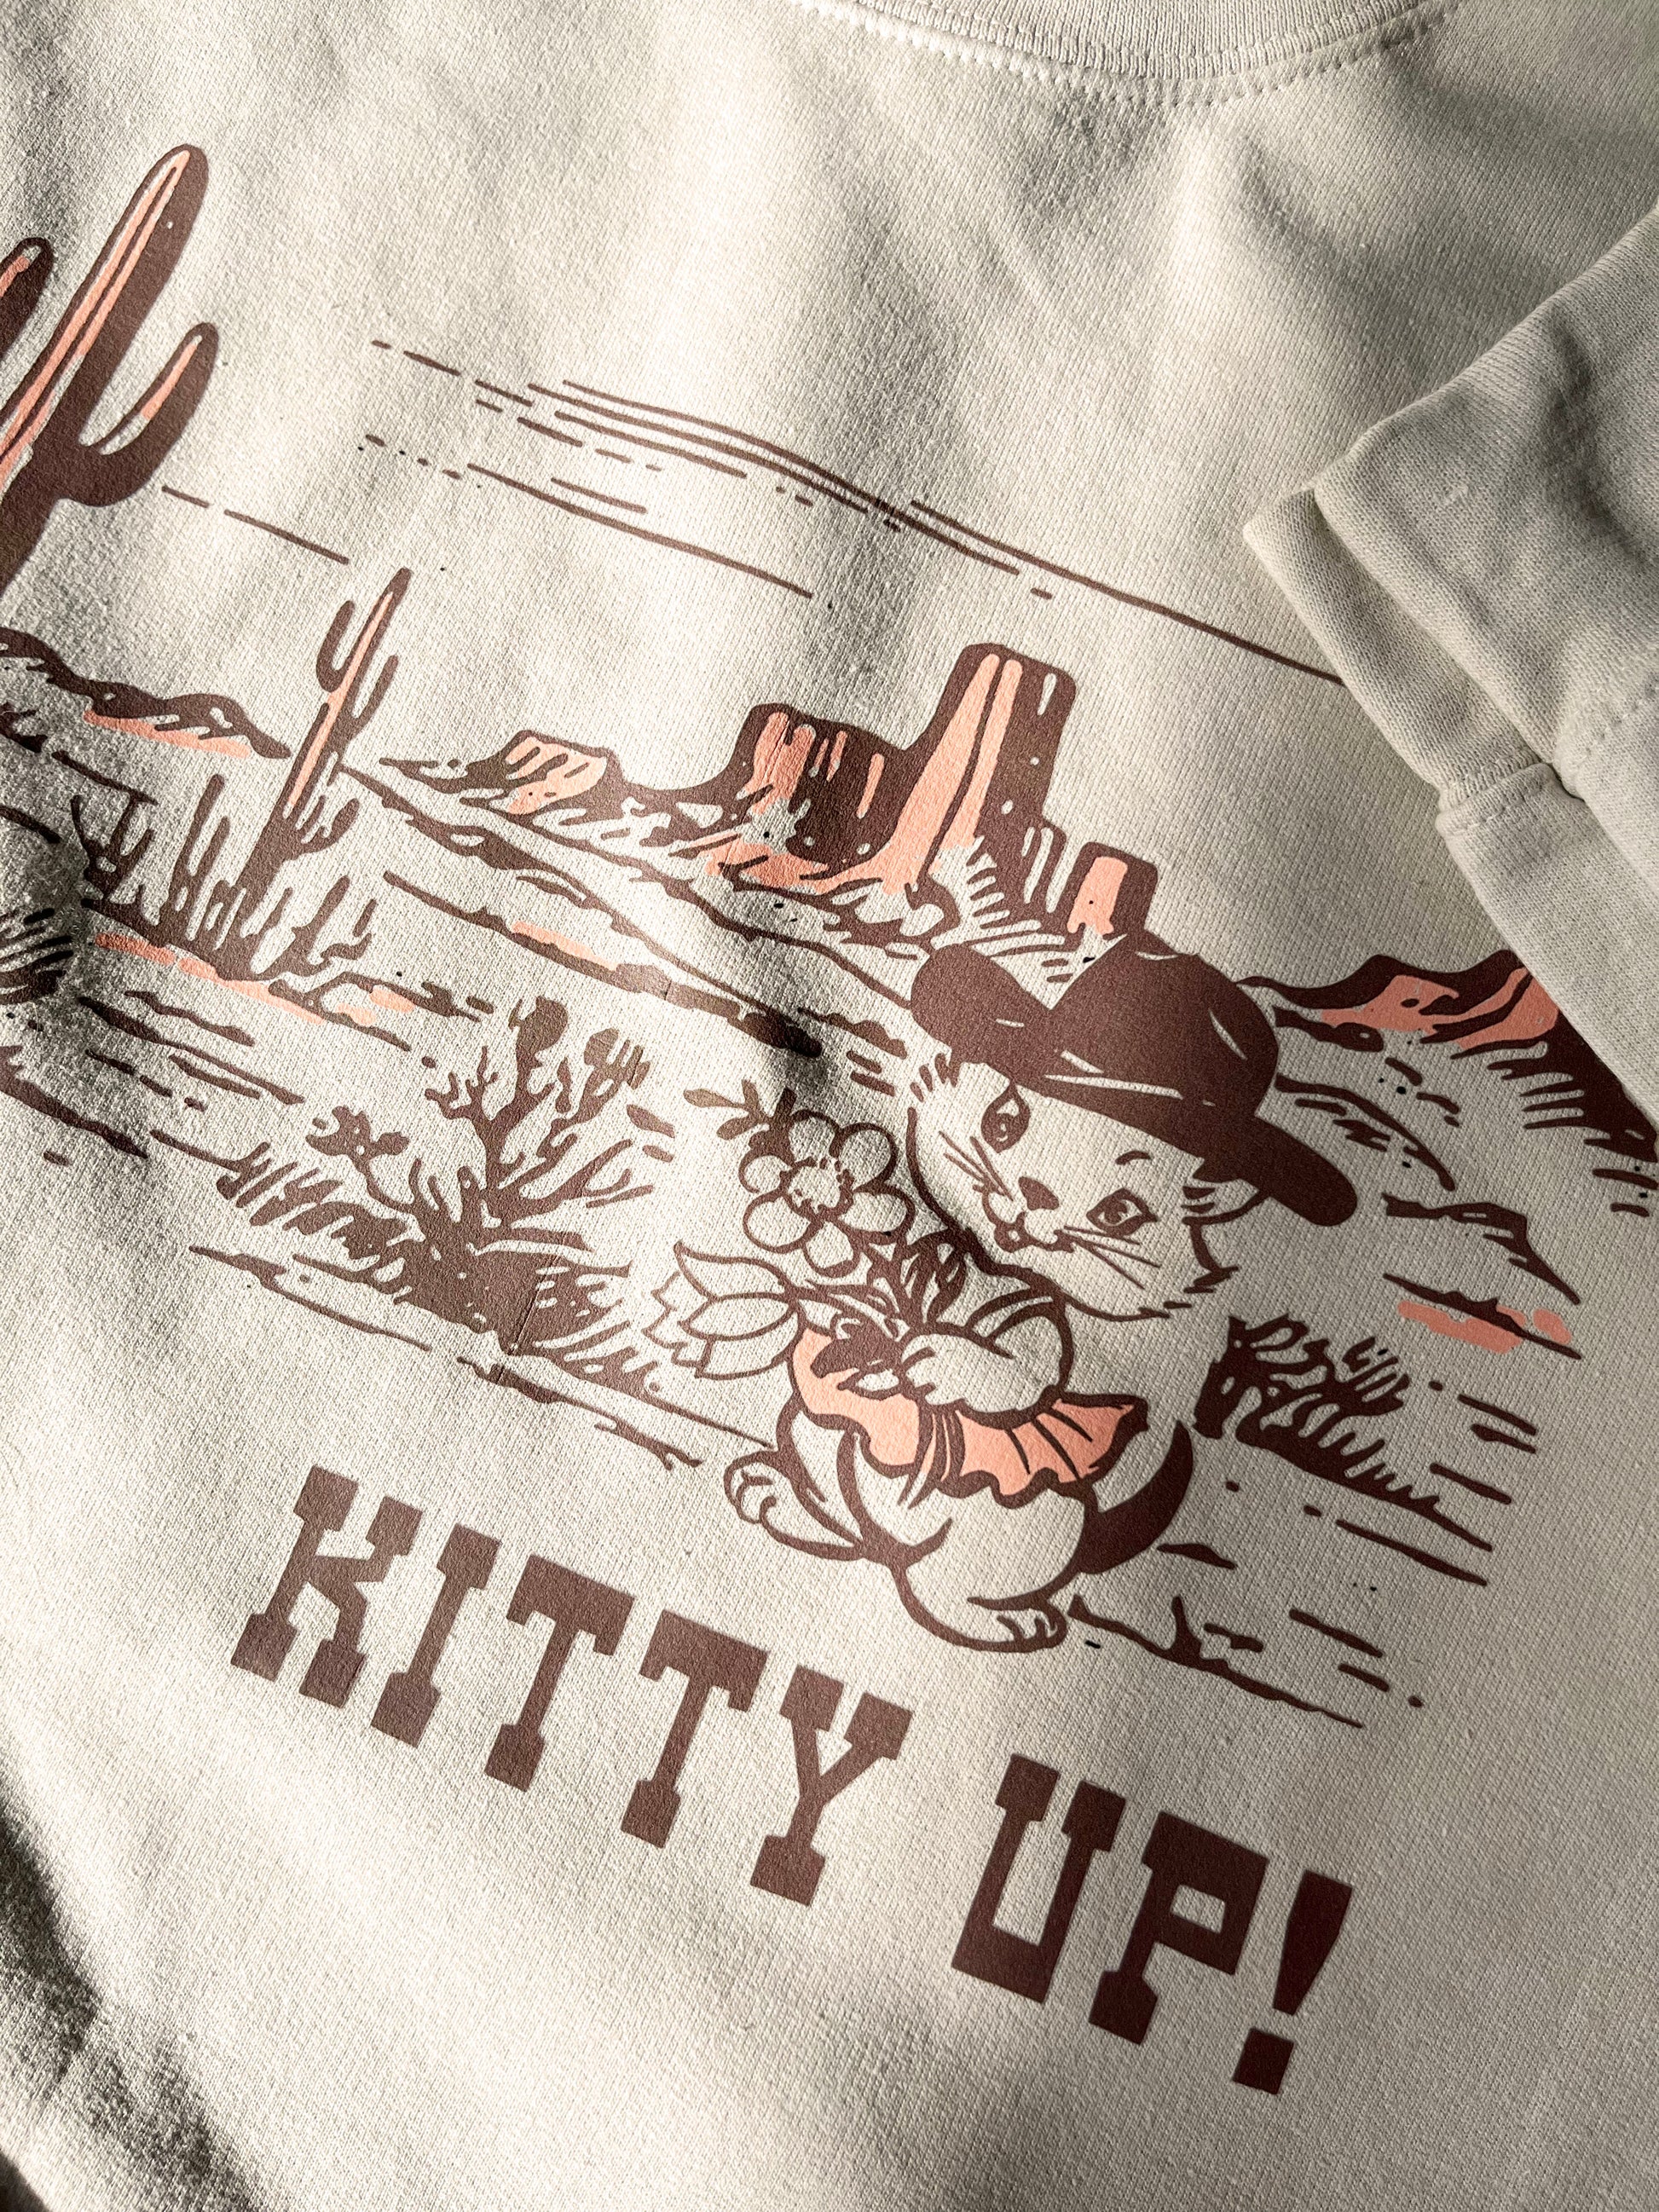 kitty up giddy up sweatshirt cat retro vintage style kitten funny shirt western style graphic fun shirt coin laundry